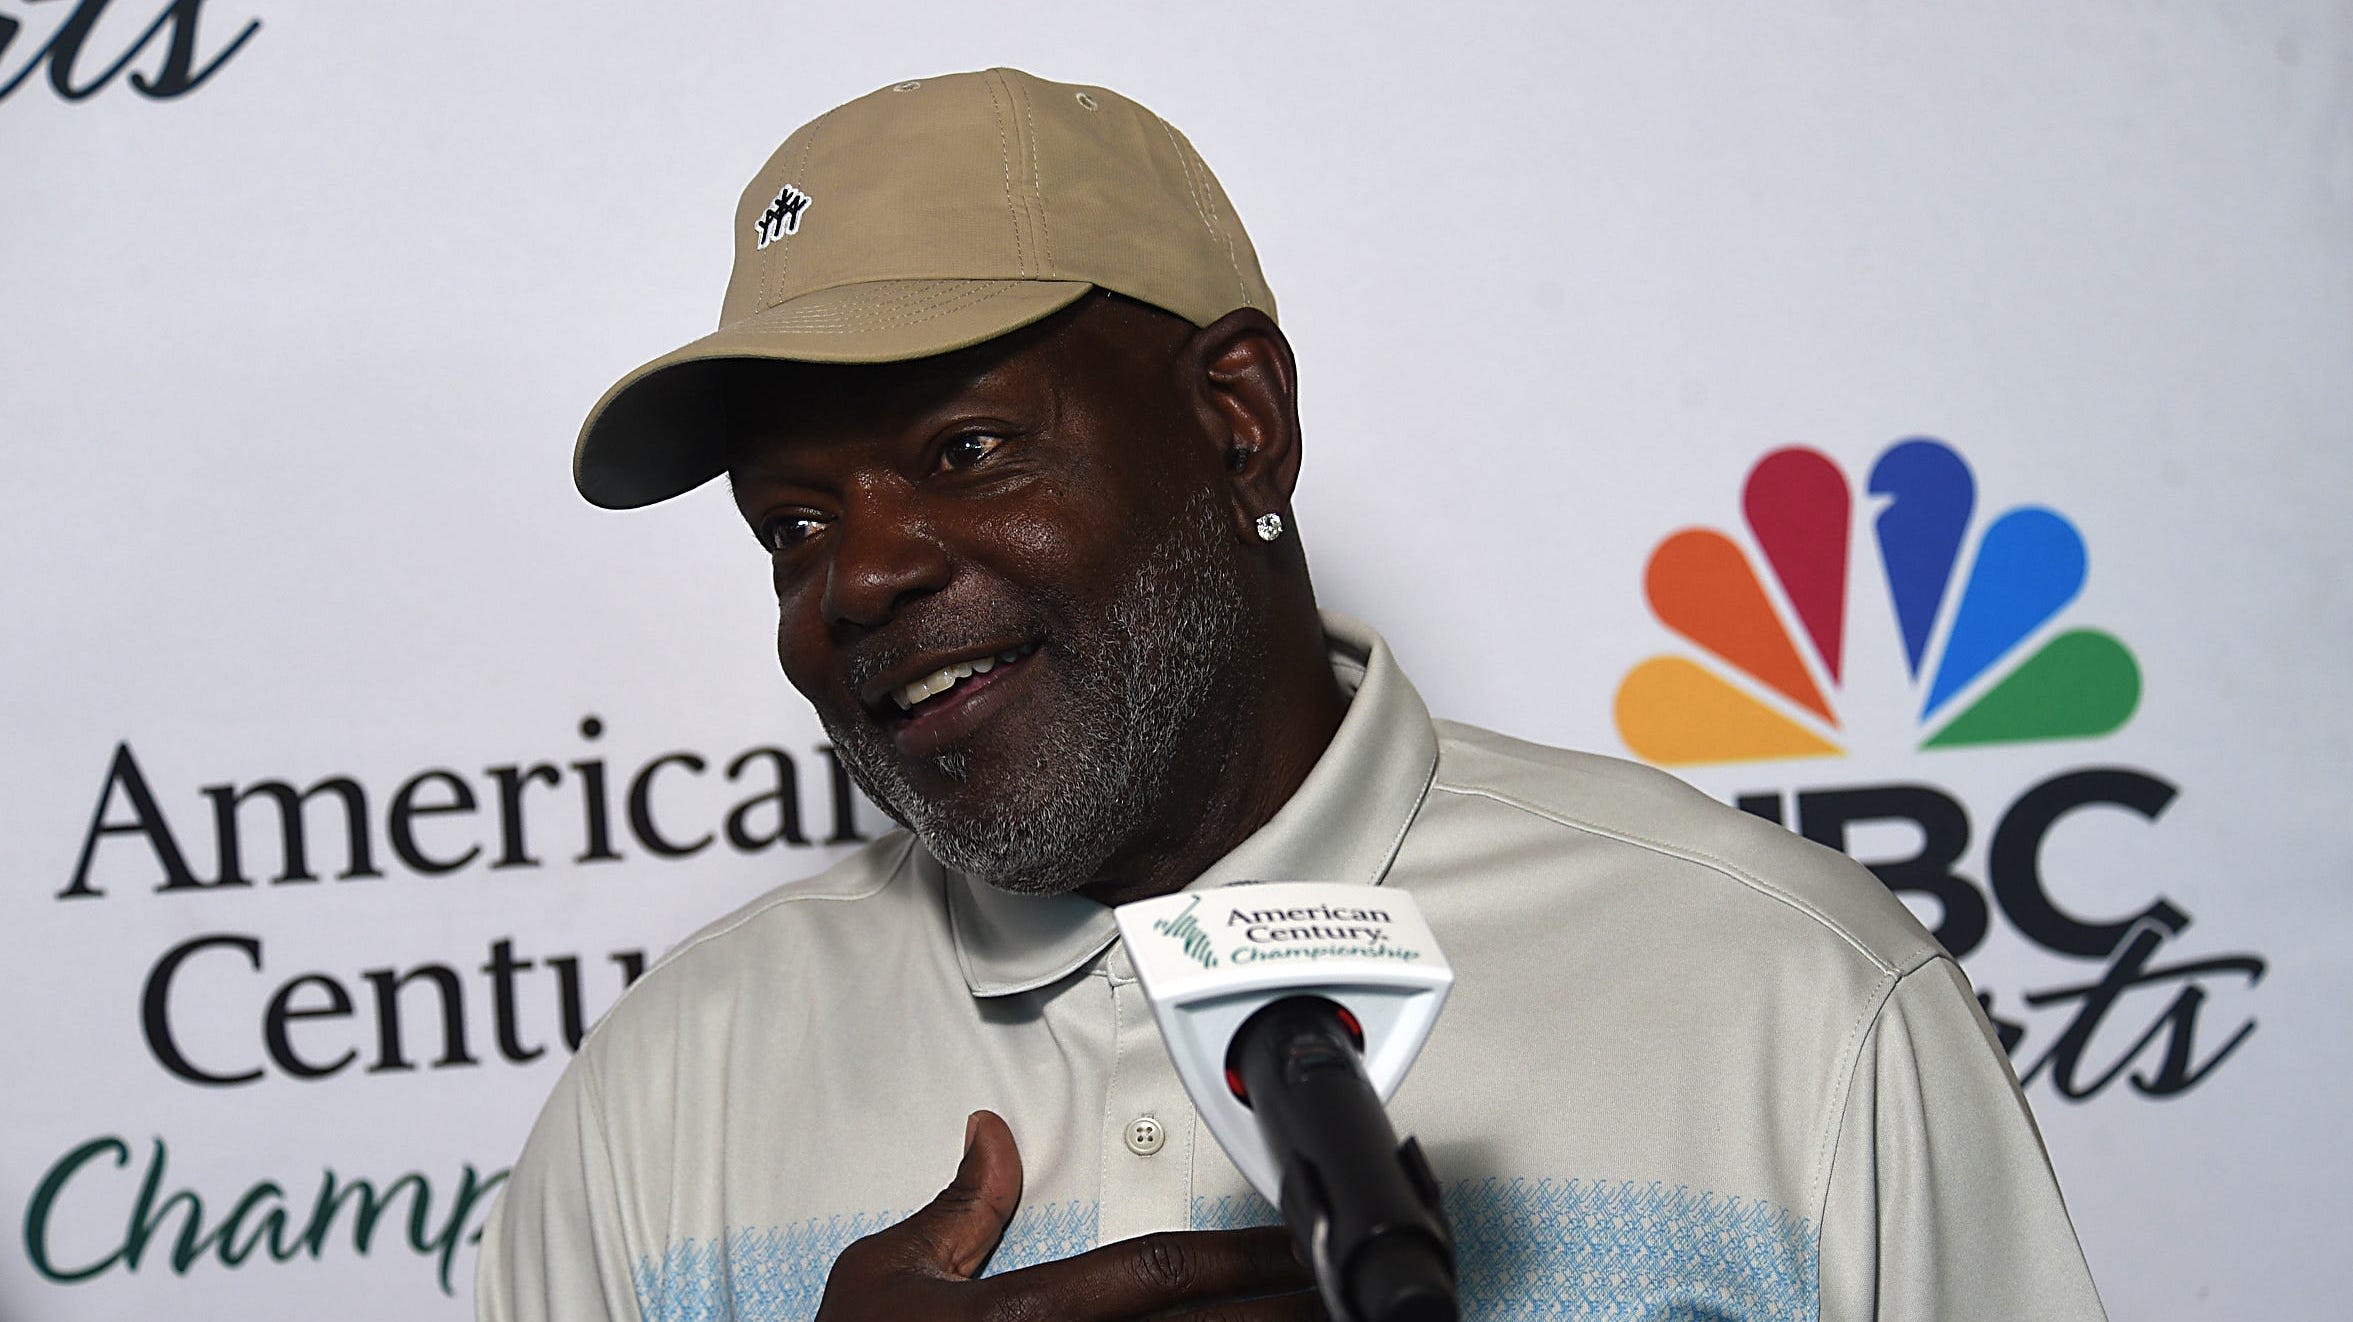 Emmitt Smith ripped Florida for eliminating all DEI roles. Here's why the NFL legend spoke out.